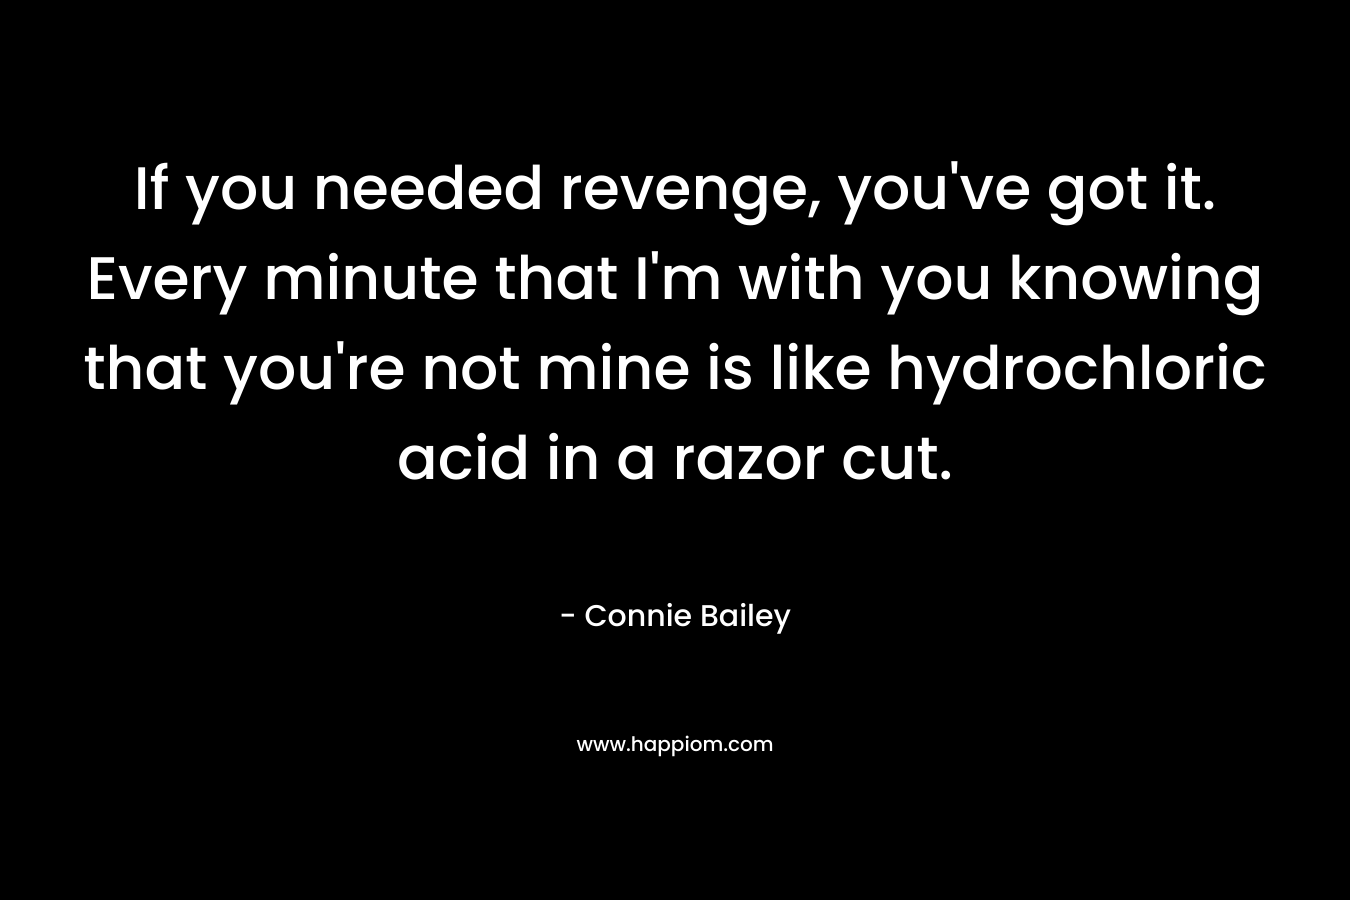 If you needed revenge, you’ve got it. Every minute that I’m with you knowing that you’re not mine is like hydrochloric acid in a razor cut. – Connie Bailey